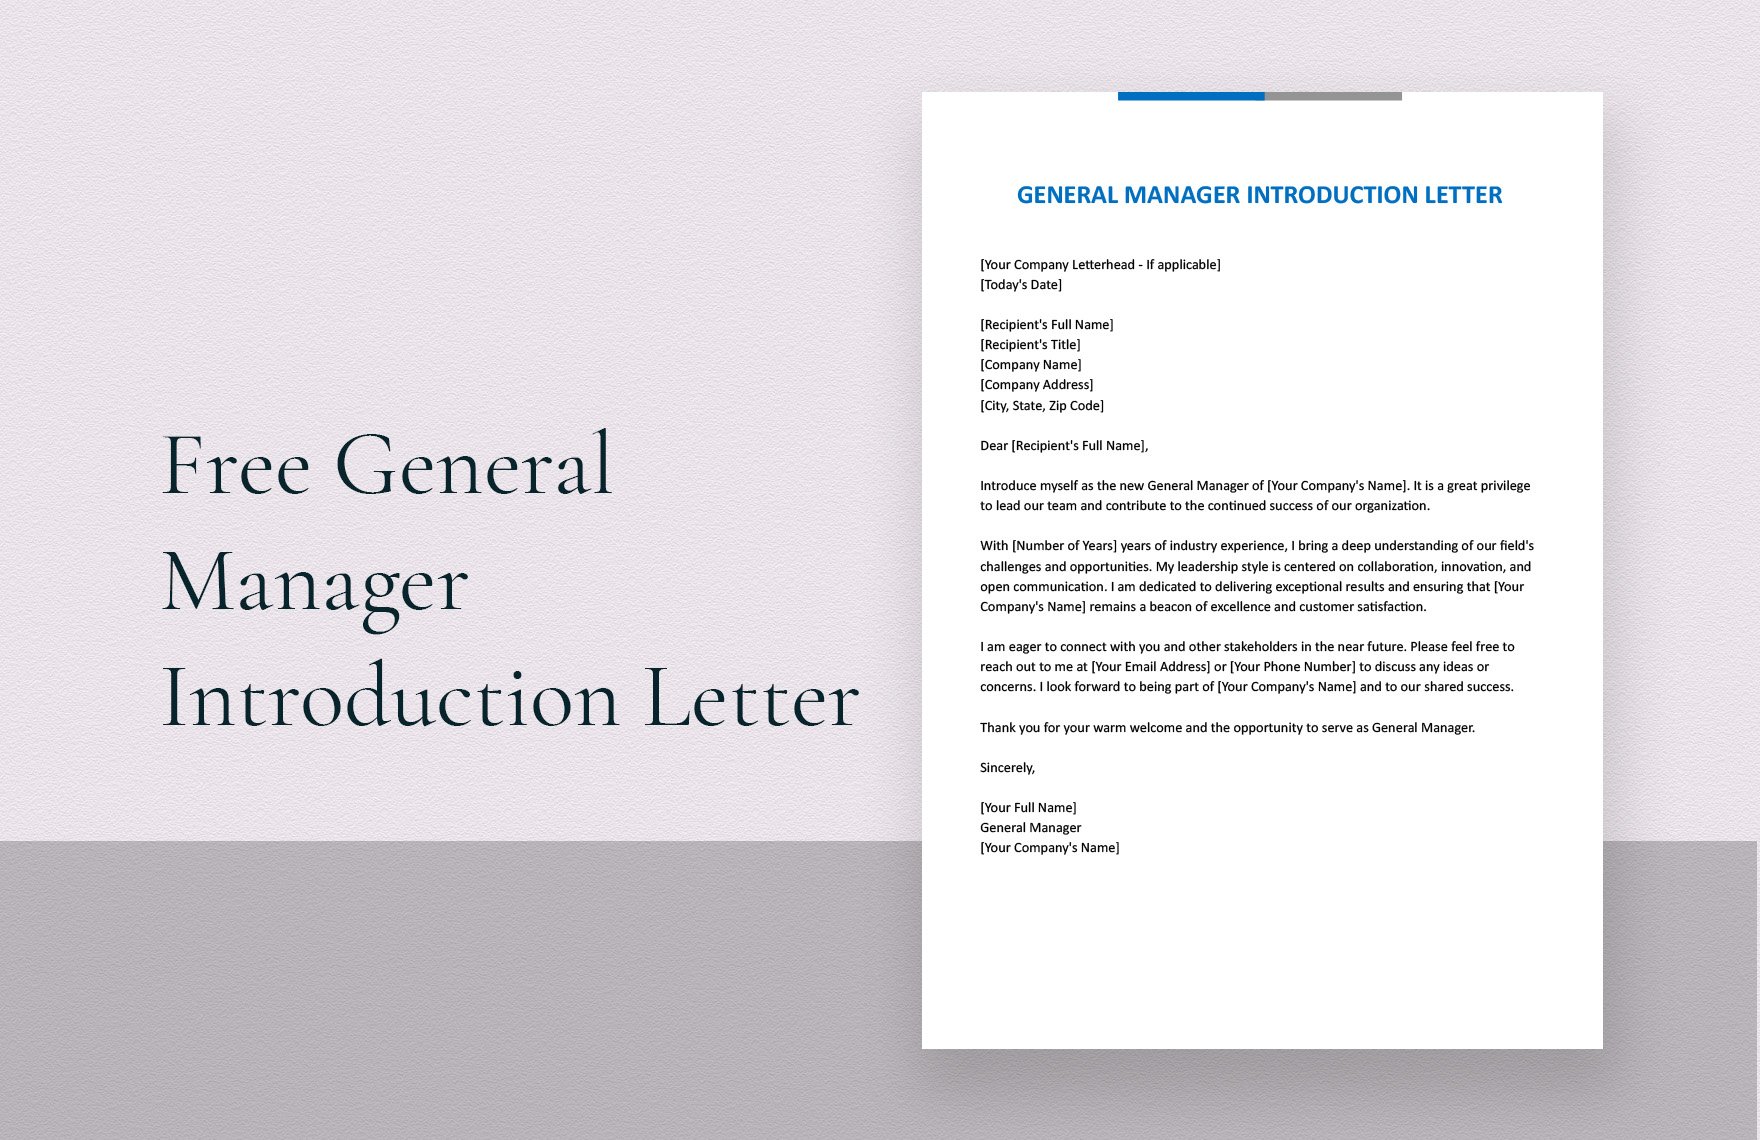 Free General Manager Introduction Letter